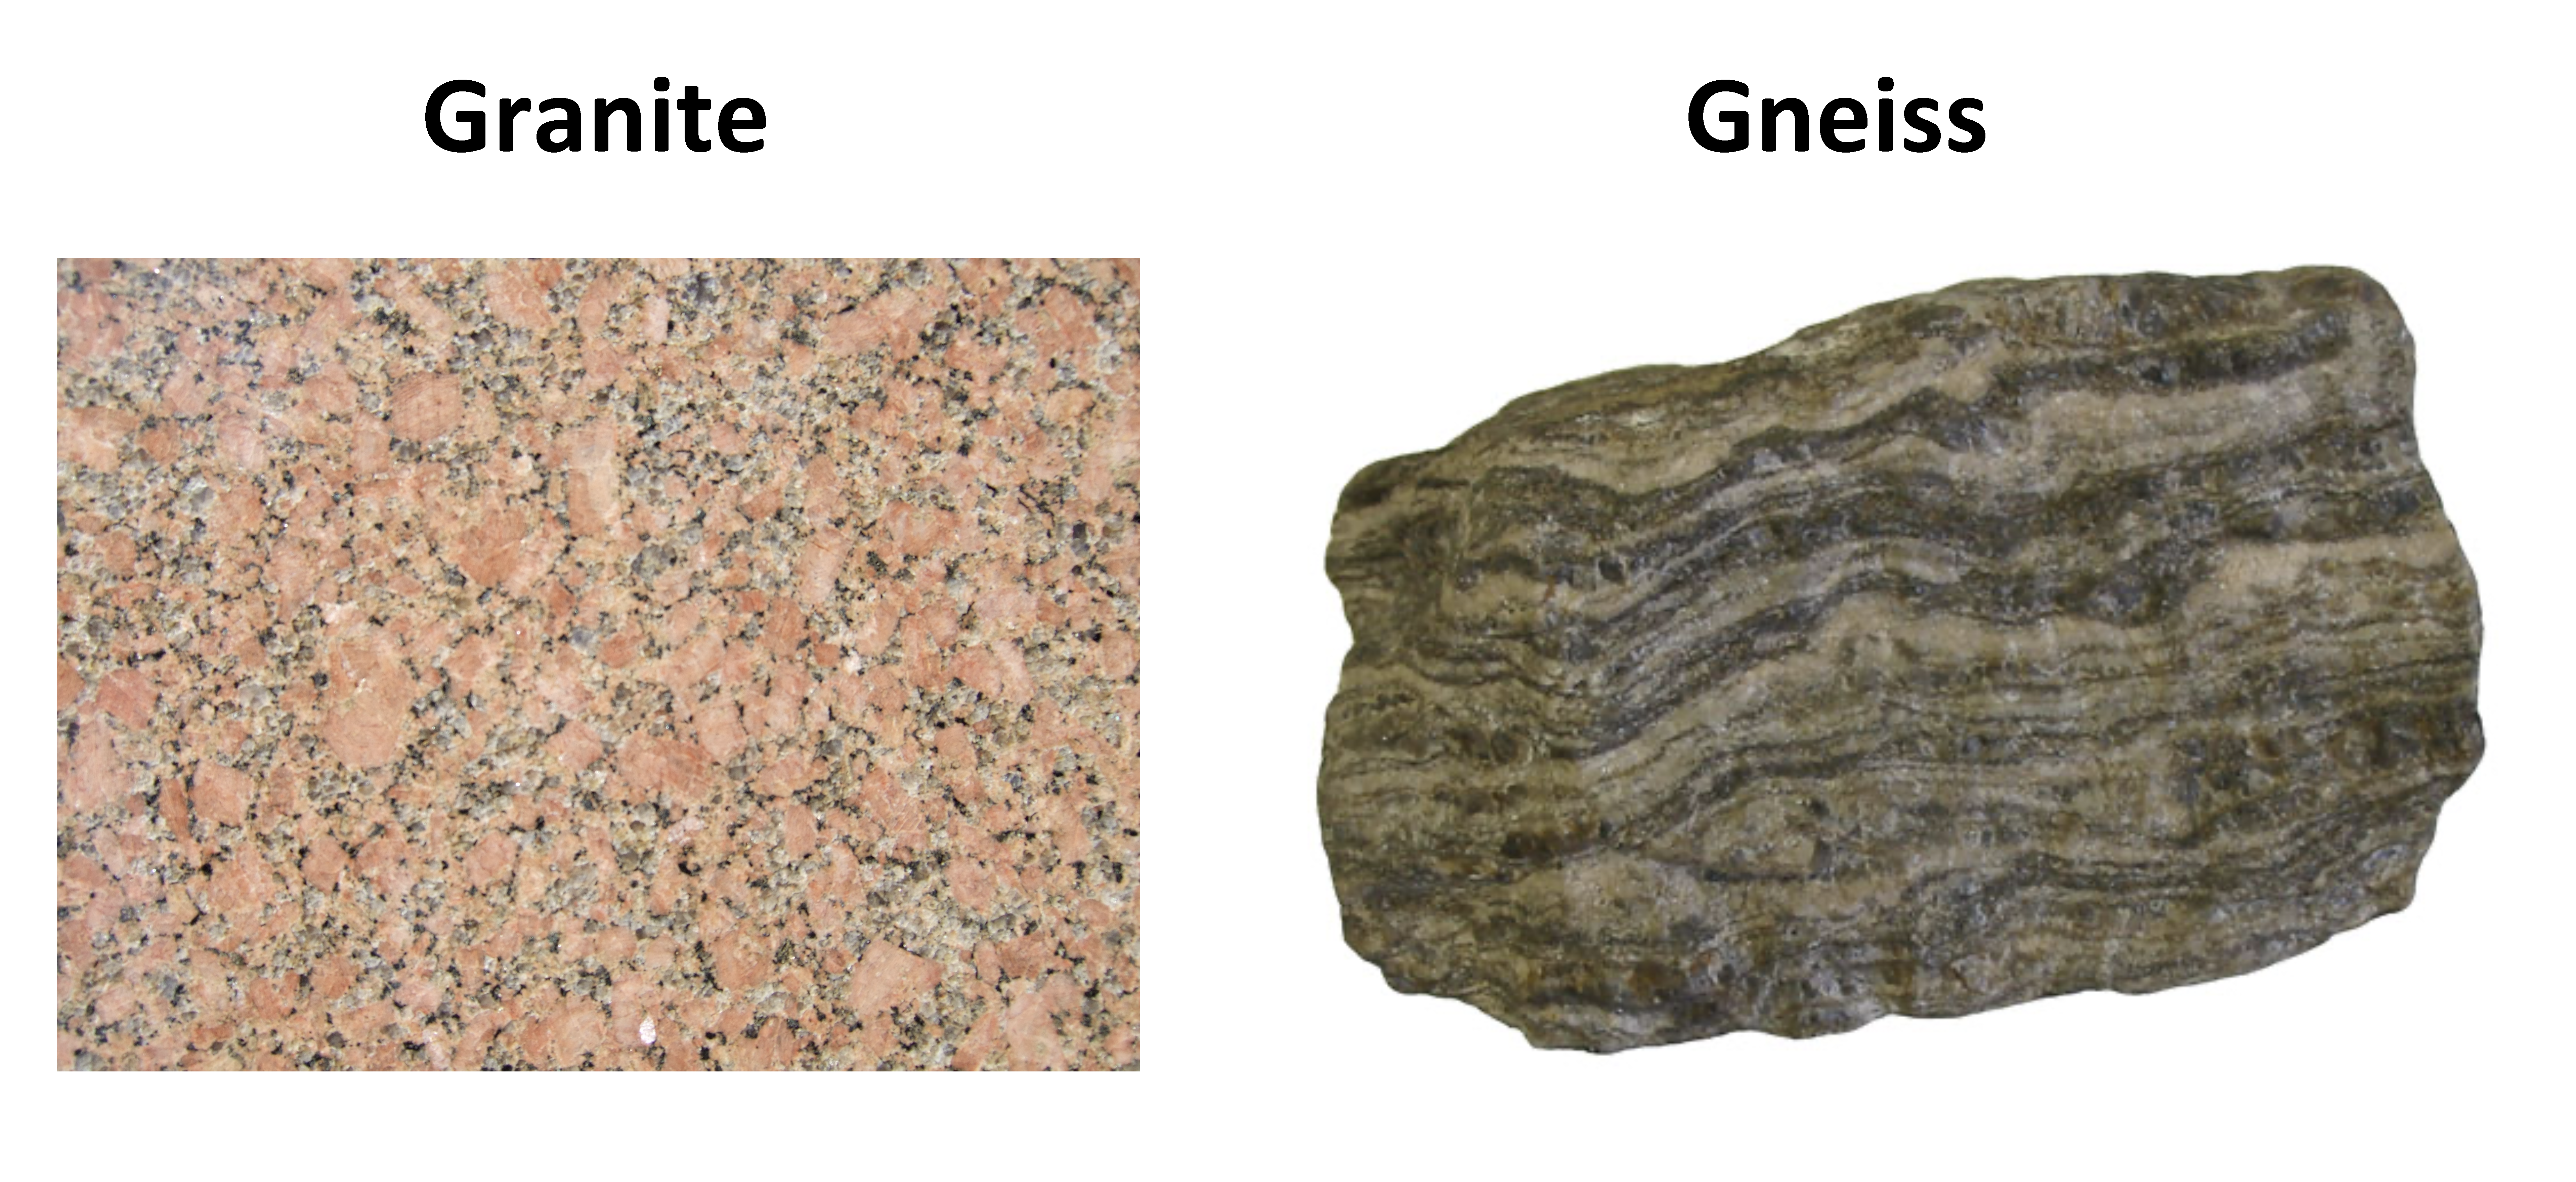 Two rock samples: the rock on the left has large pink grains and smaller black, gray, and white grains interlocked without any visible pattern; the rock on the right has banded layering of dark minerals and light minerals.